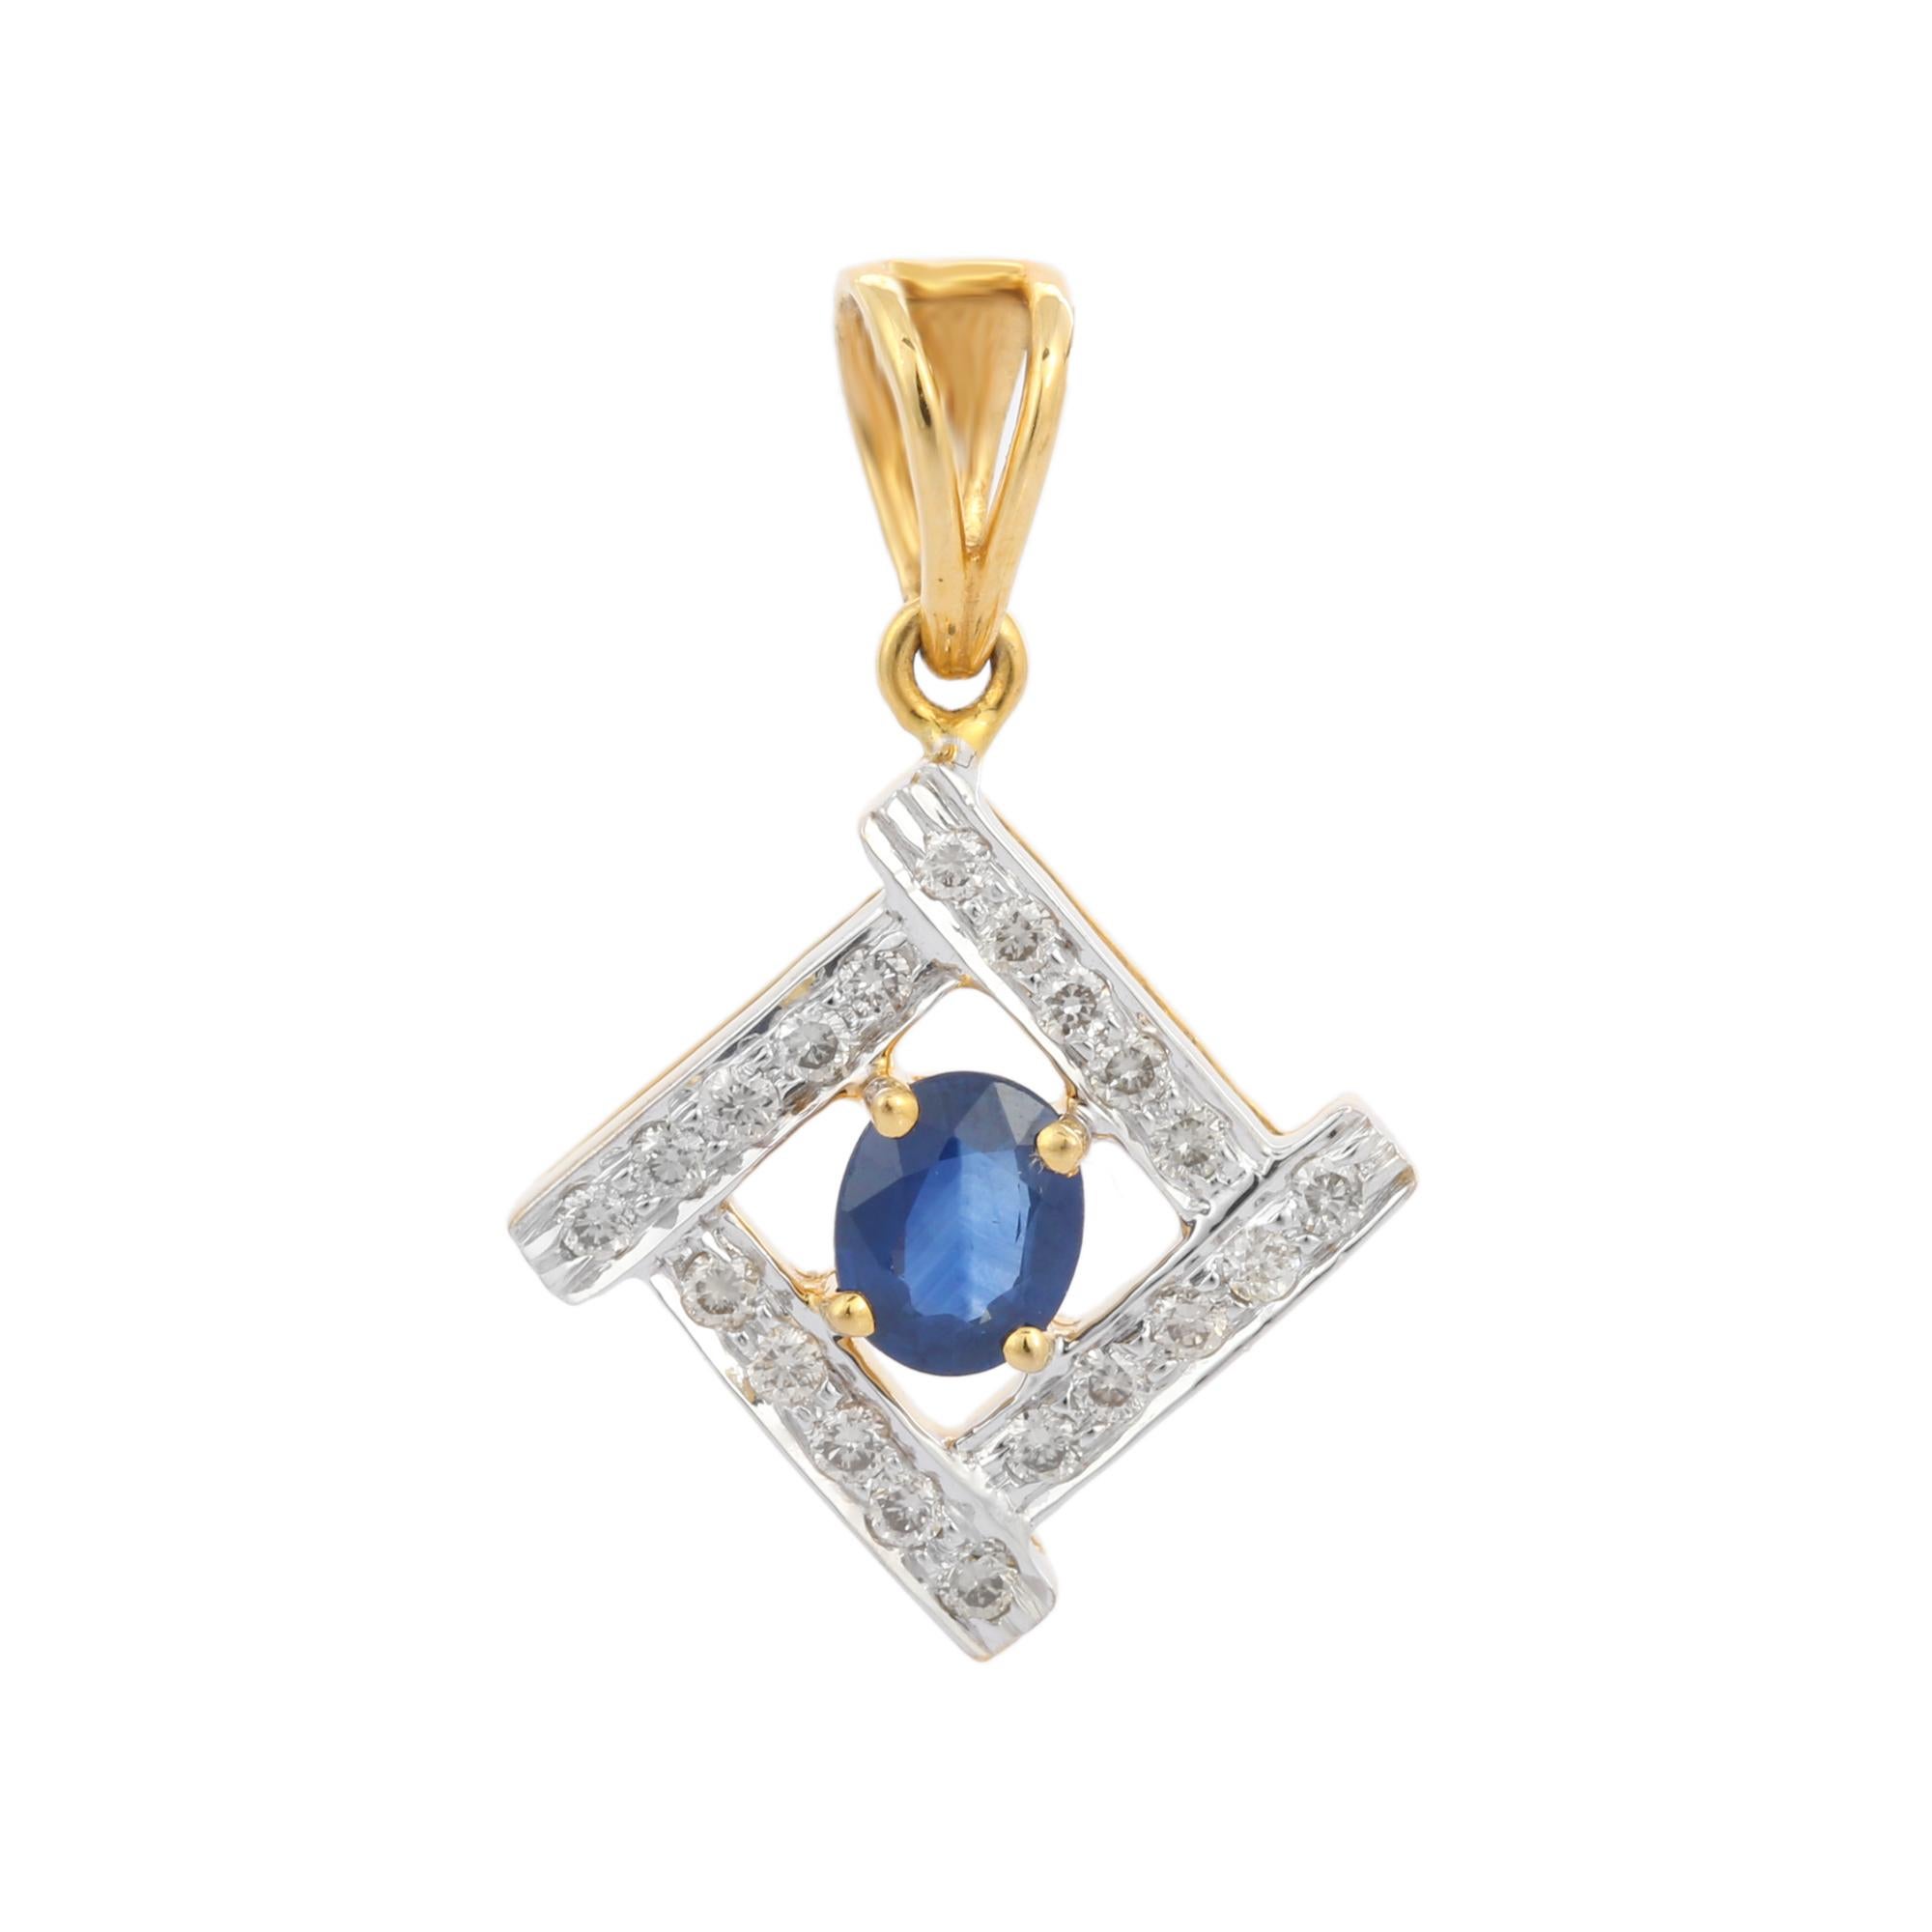 Natural Blue Sapphire pendant in 18K Gold. It has oval cut sapphire studded with diamonds that completes your look with a decent touch. Pendants are used to wear or gifted to represent love and promises. It's an attractive jewelry piece that goes